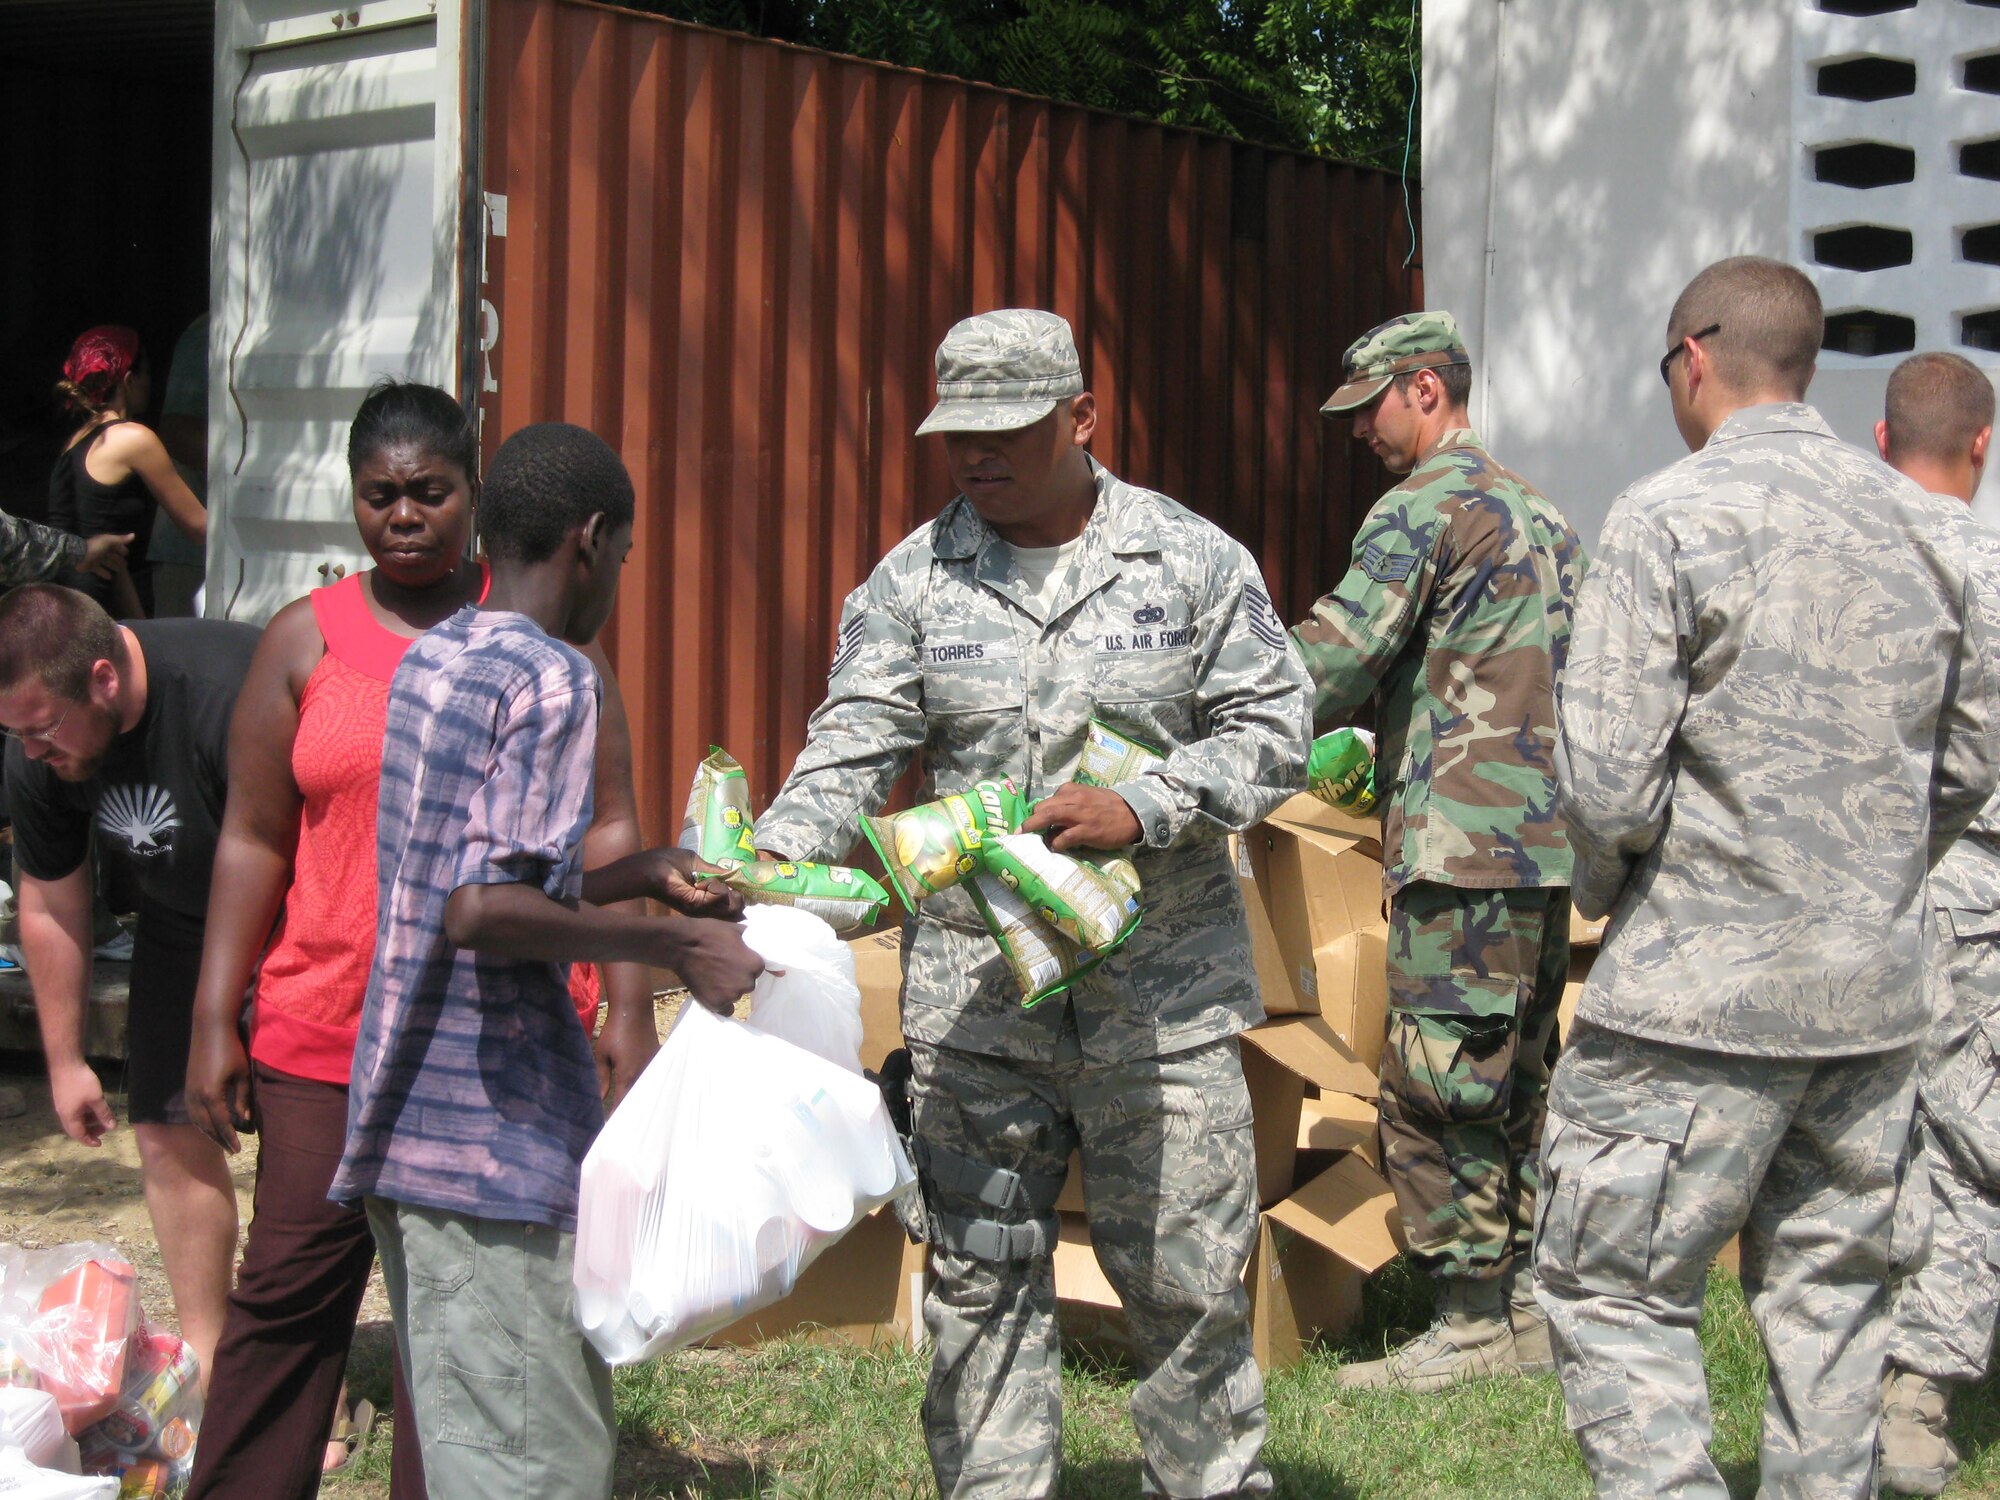 Technical Sergeant Juan Torres, 436th Logistic Readiness Squadron assistant non-commissioned officer in charge of vehicle management and analysis, passes out food to children at a Haitian orphanage during his temporary duty assignment where he was attached to the 24th Air Expeditionary Group as fleet manager.  Sergeant Torres was awarded an Air Force Achievement medal as well as a coin from Admiral Mike Mullen, Chairman Joint Chiefs of Staff.  (Courtesy photo)